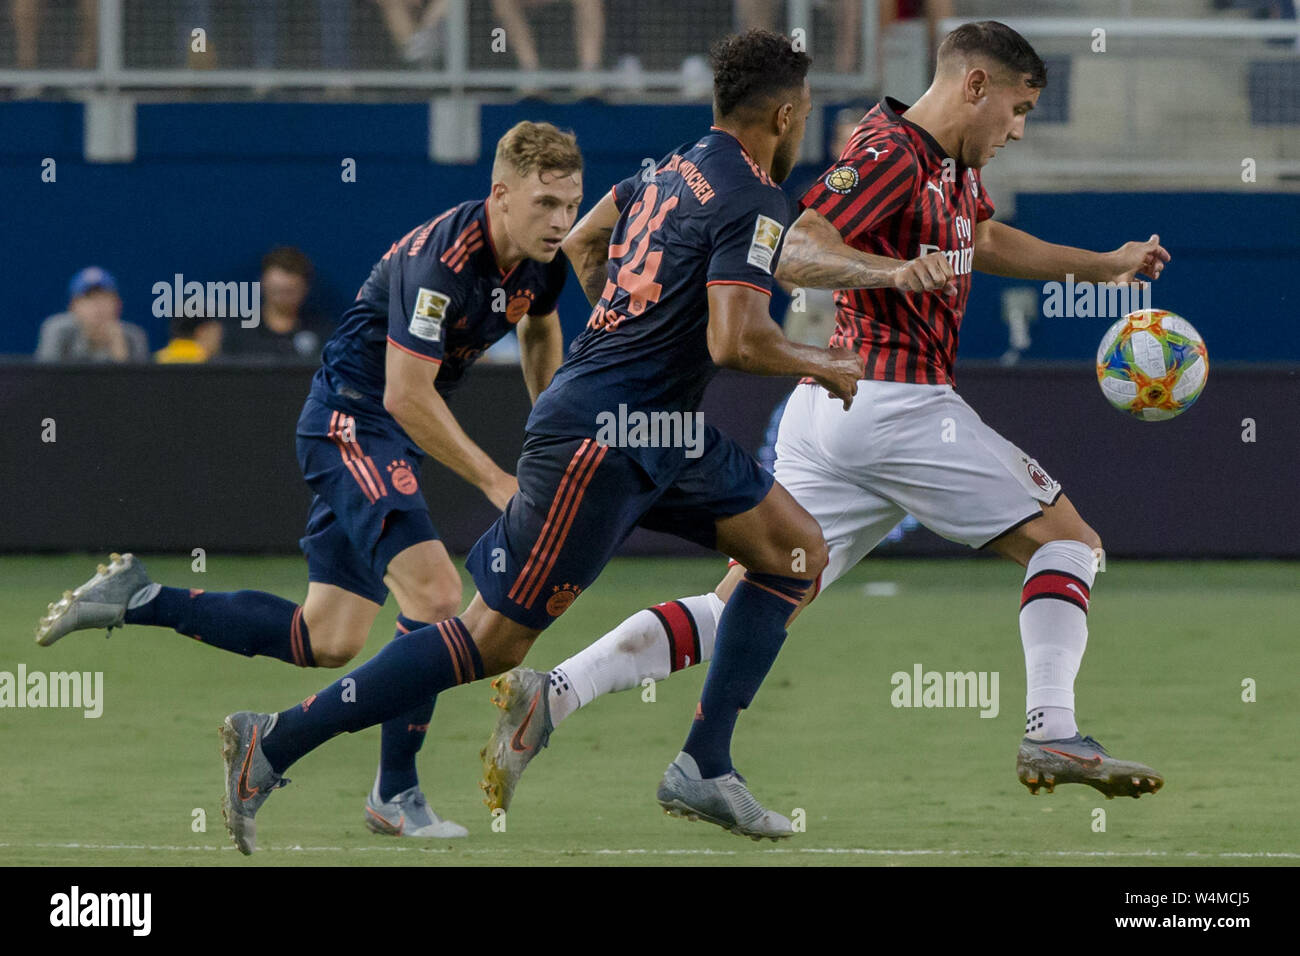 Kansas City, Kansas, USA. 23rd July, 2019. From r-l, AC Milan defender Theo Hernandez #19 takes the offense against FC Bayern Munich midfielder Corentin Tolisso #24 and FC Bayern Munich defender Joshua Kimmich #32 during the 1st half of the game. Credit: Serena S.Y. Hsu/ZUMA Wire/Alamy Live News Stock Photo